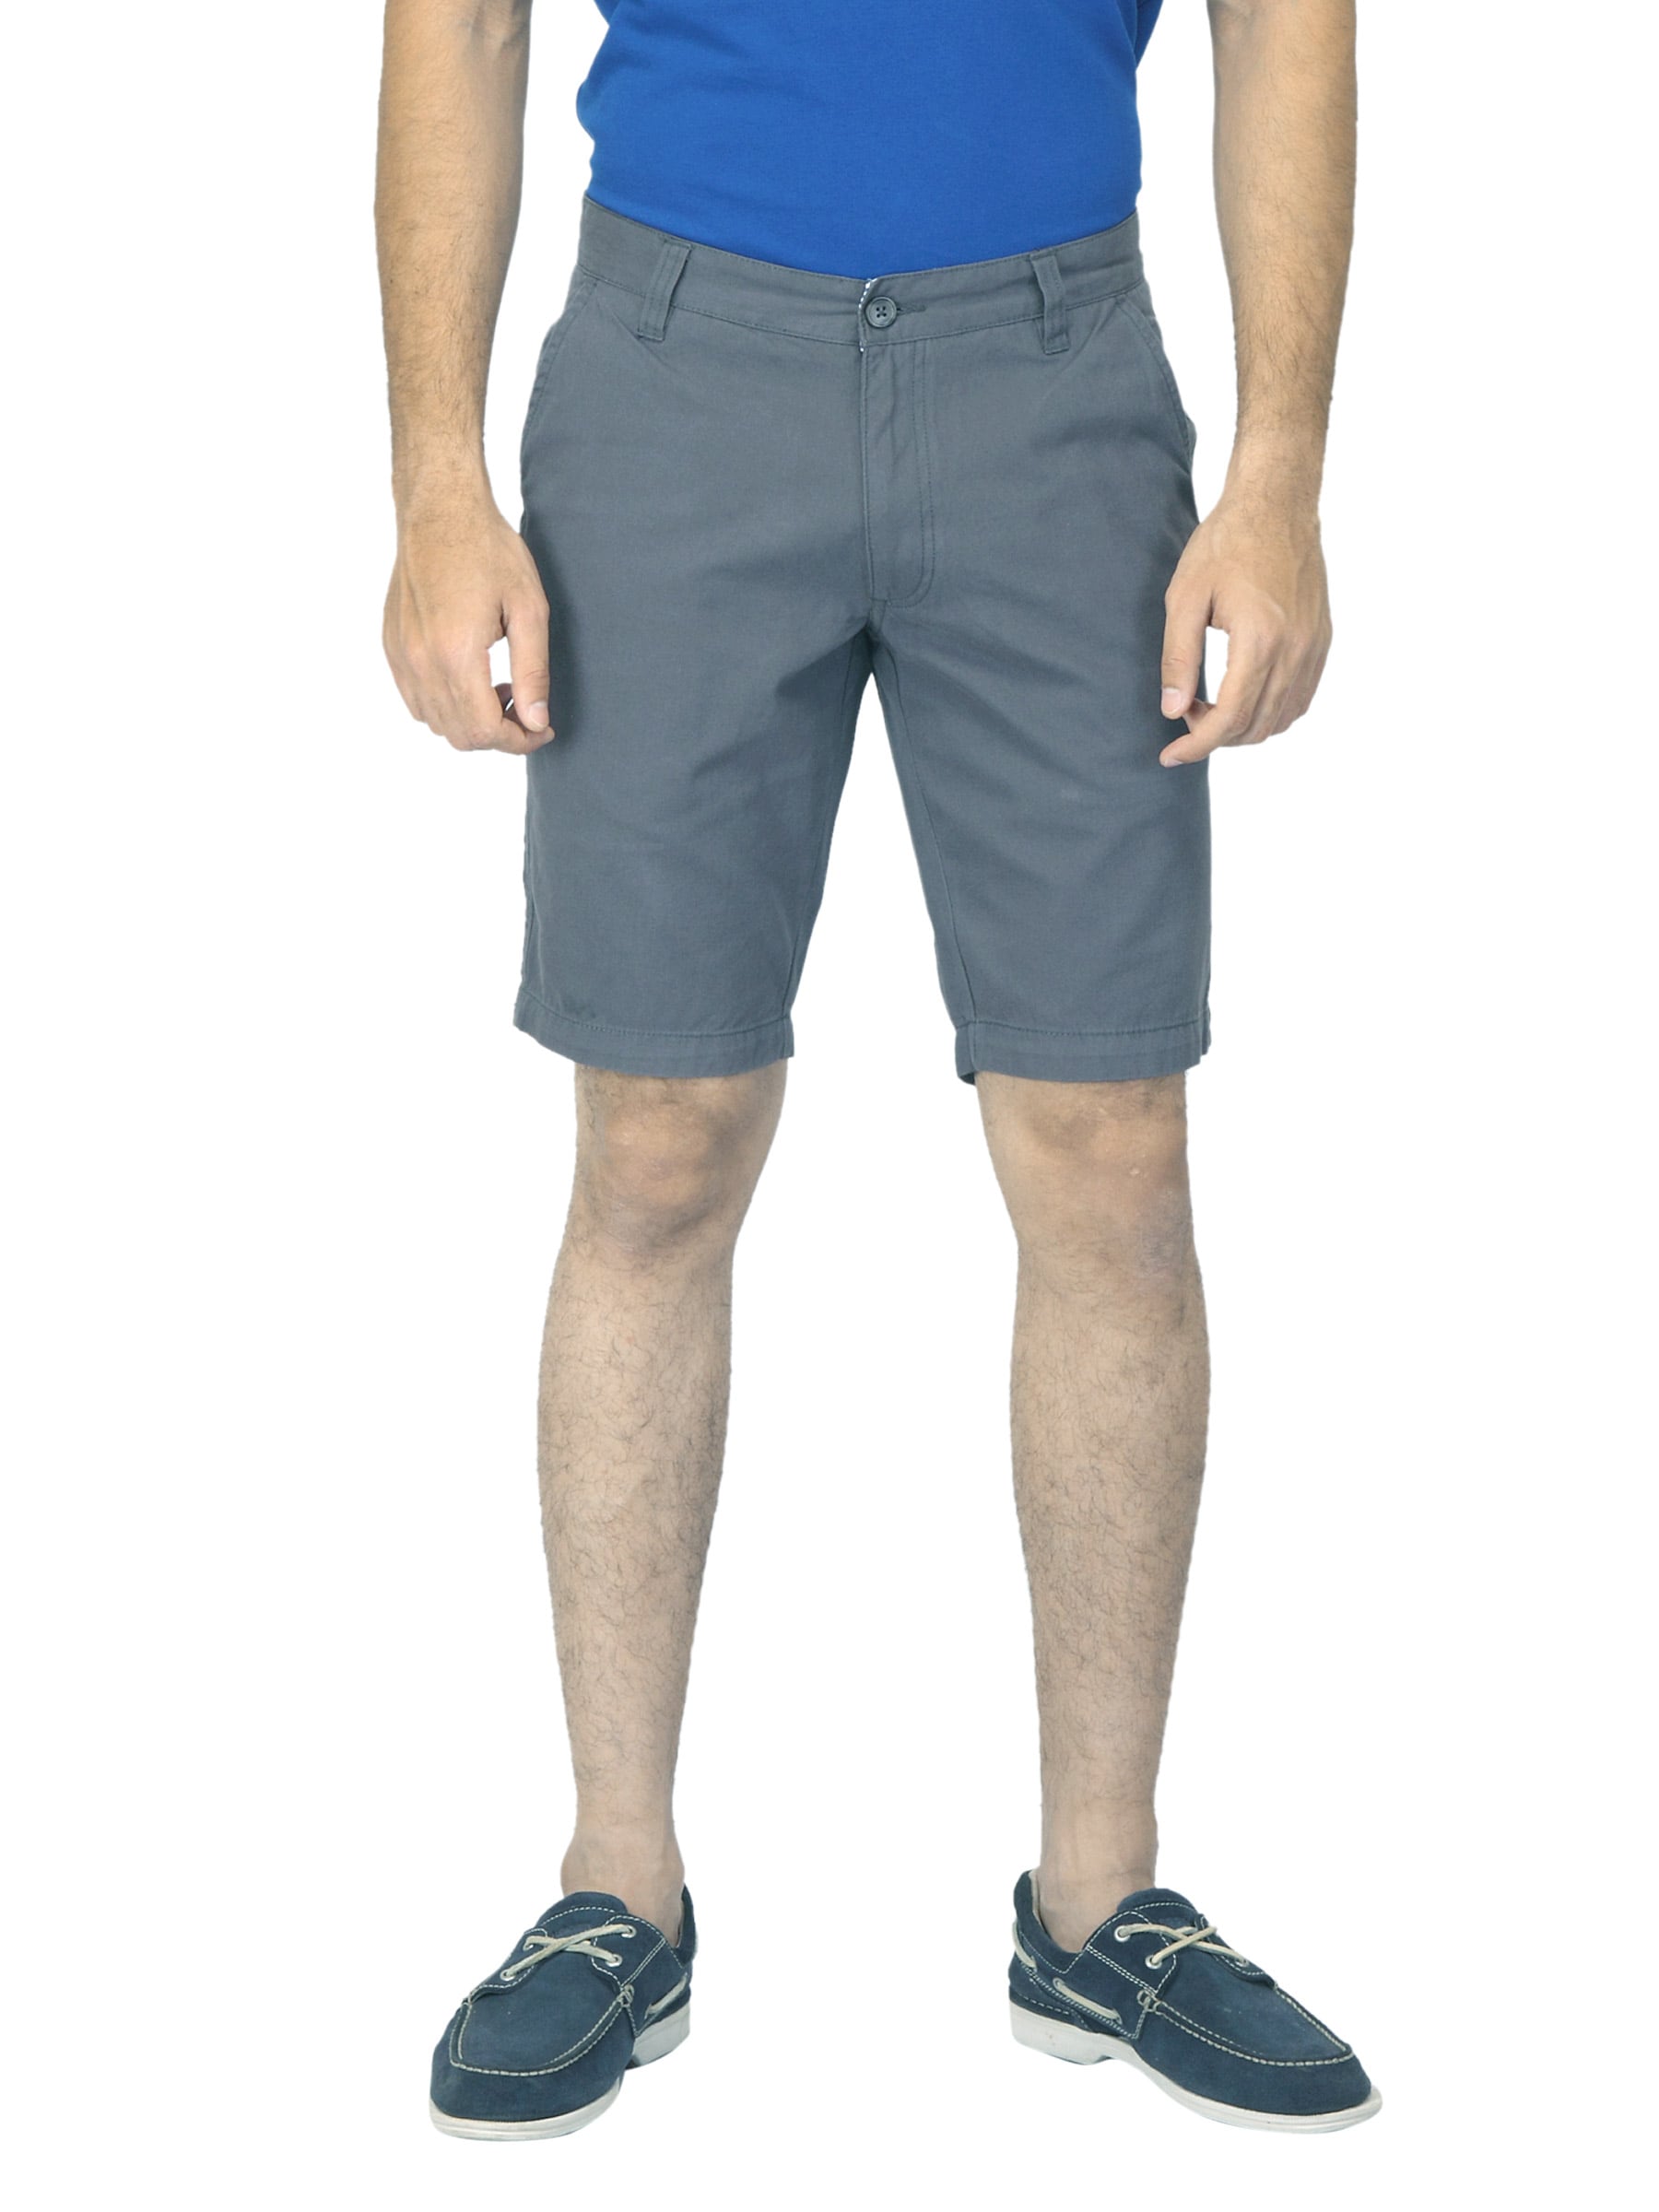 Scullers Men Grey Shorts